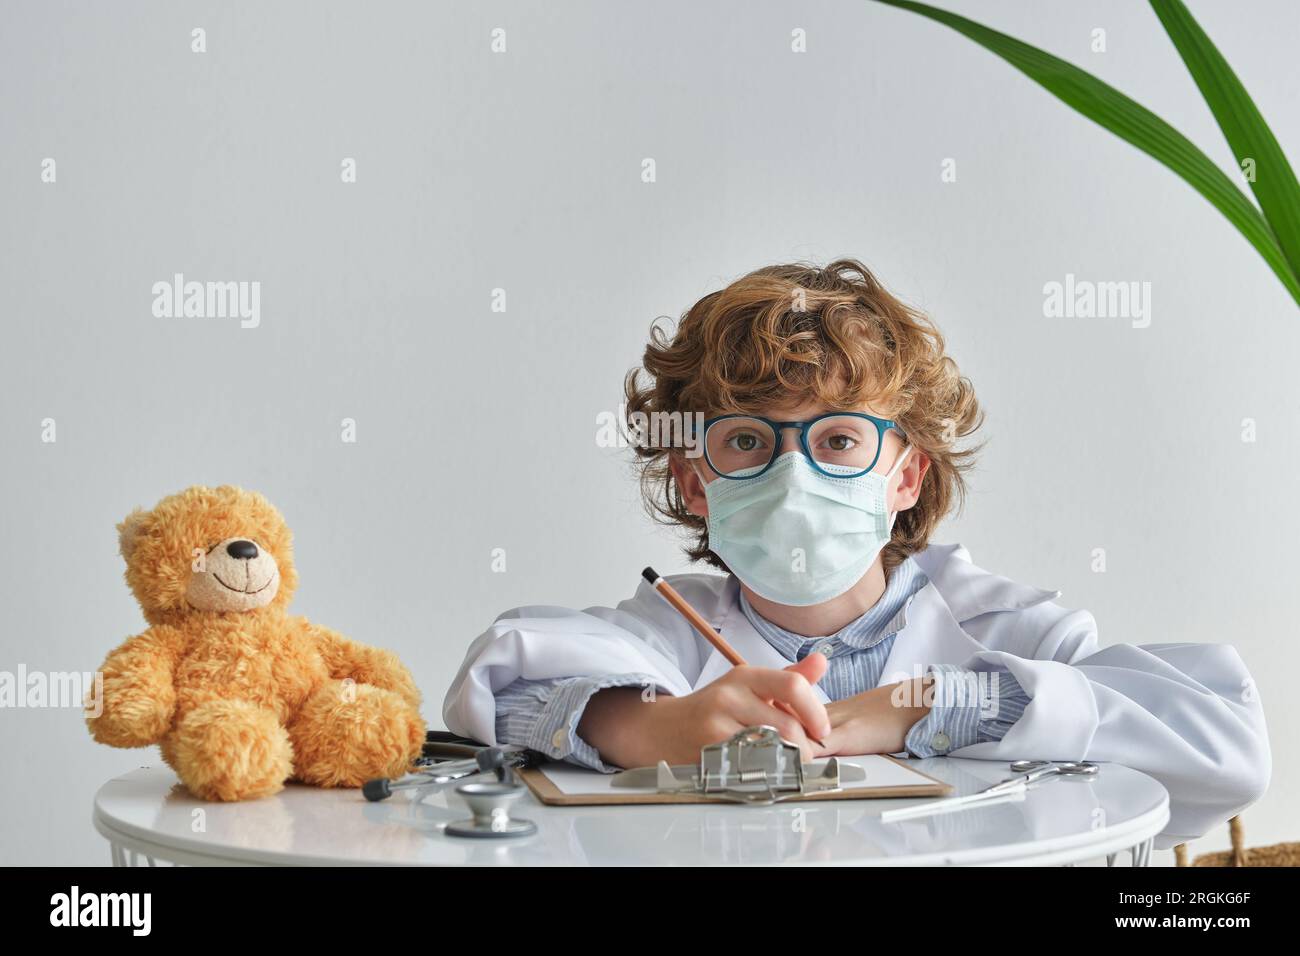 Child in eyeglasses and respiratory mask looking at camera while sitting at table with soft bear and clipboard on white background Stock Photo